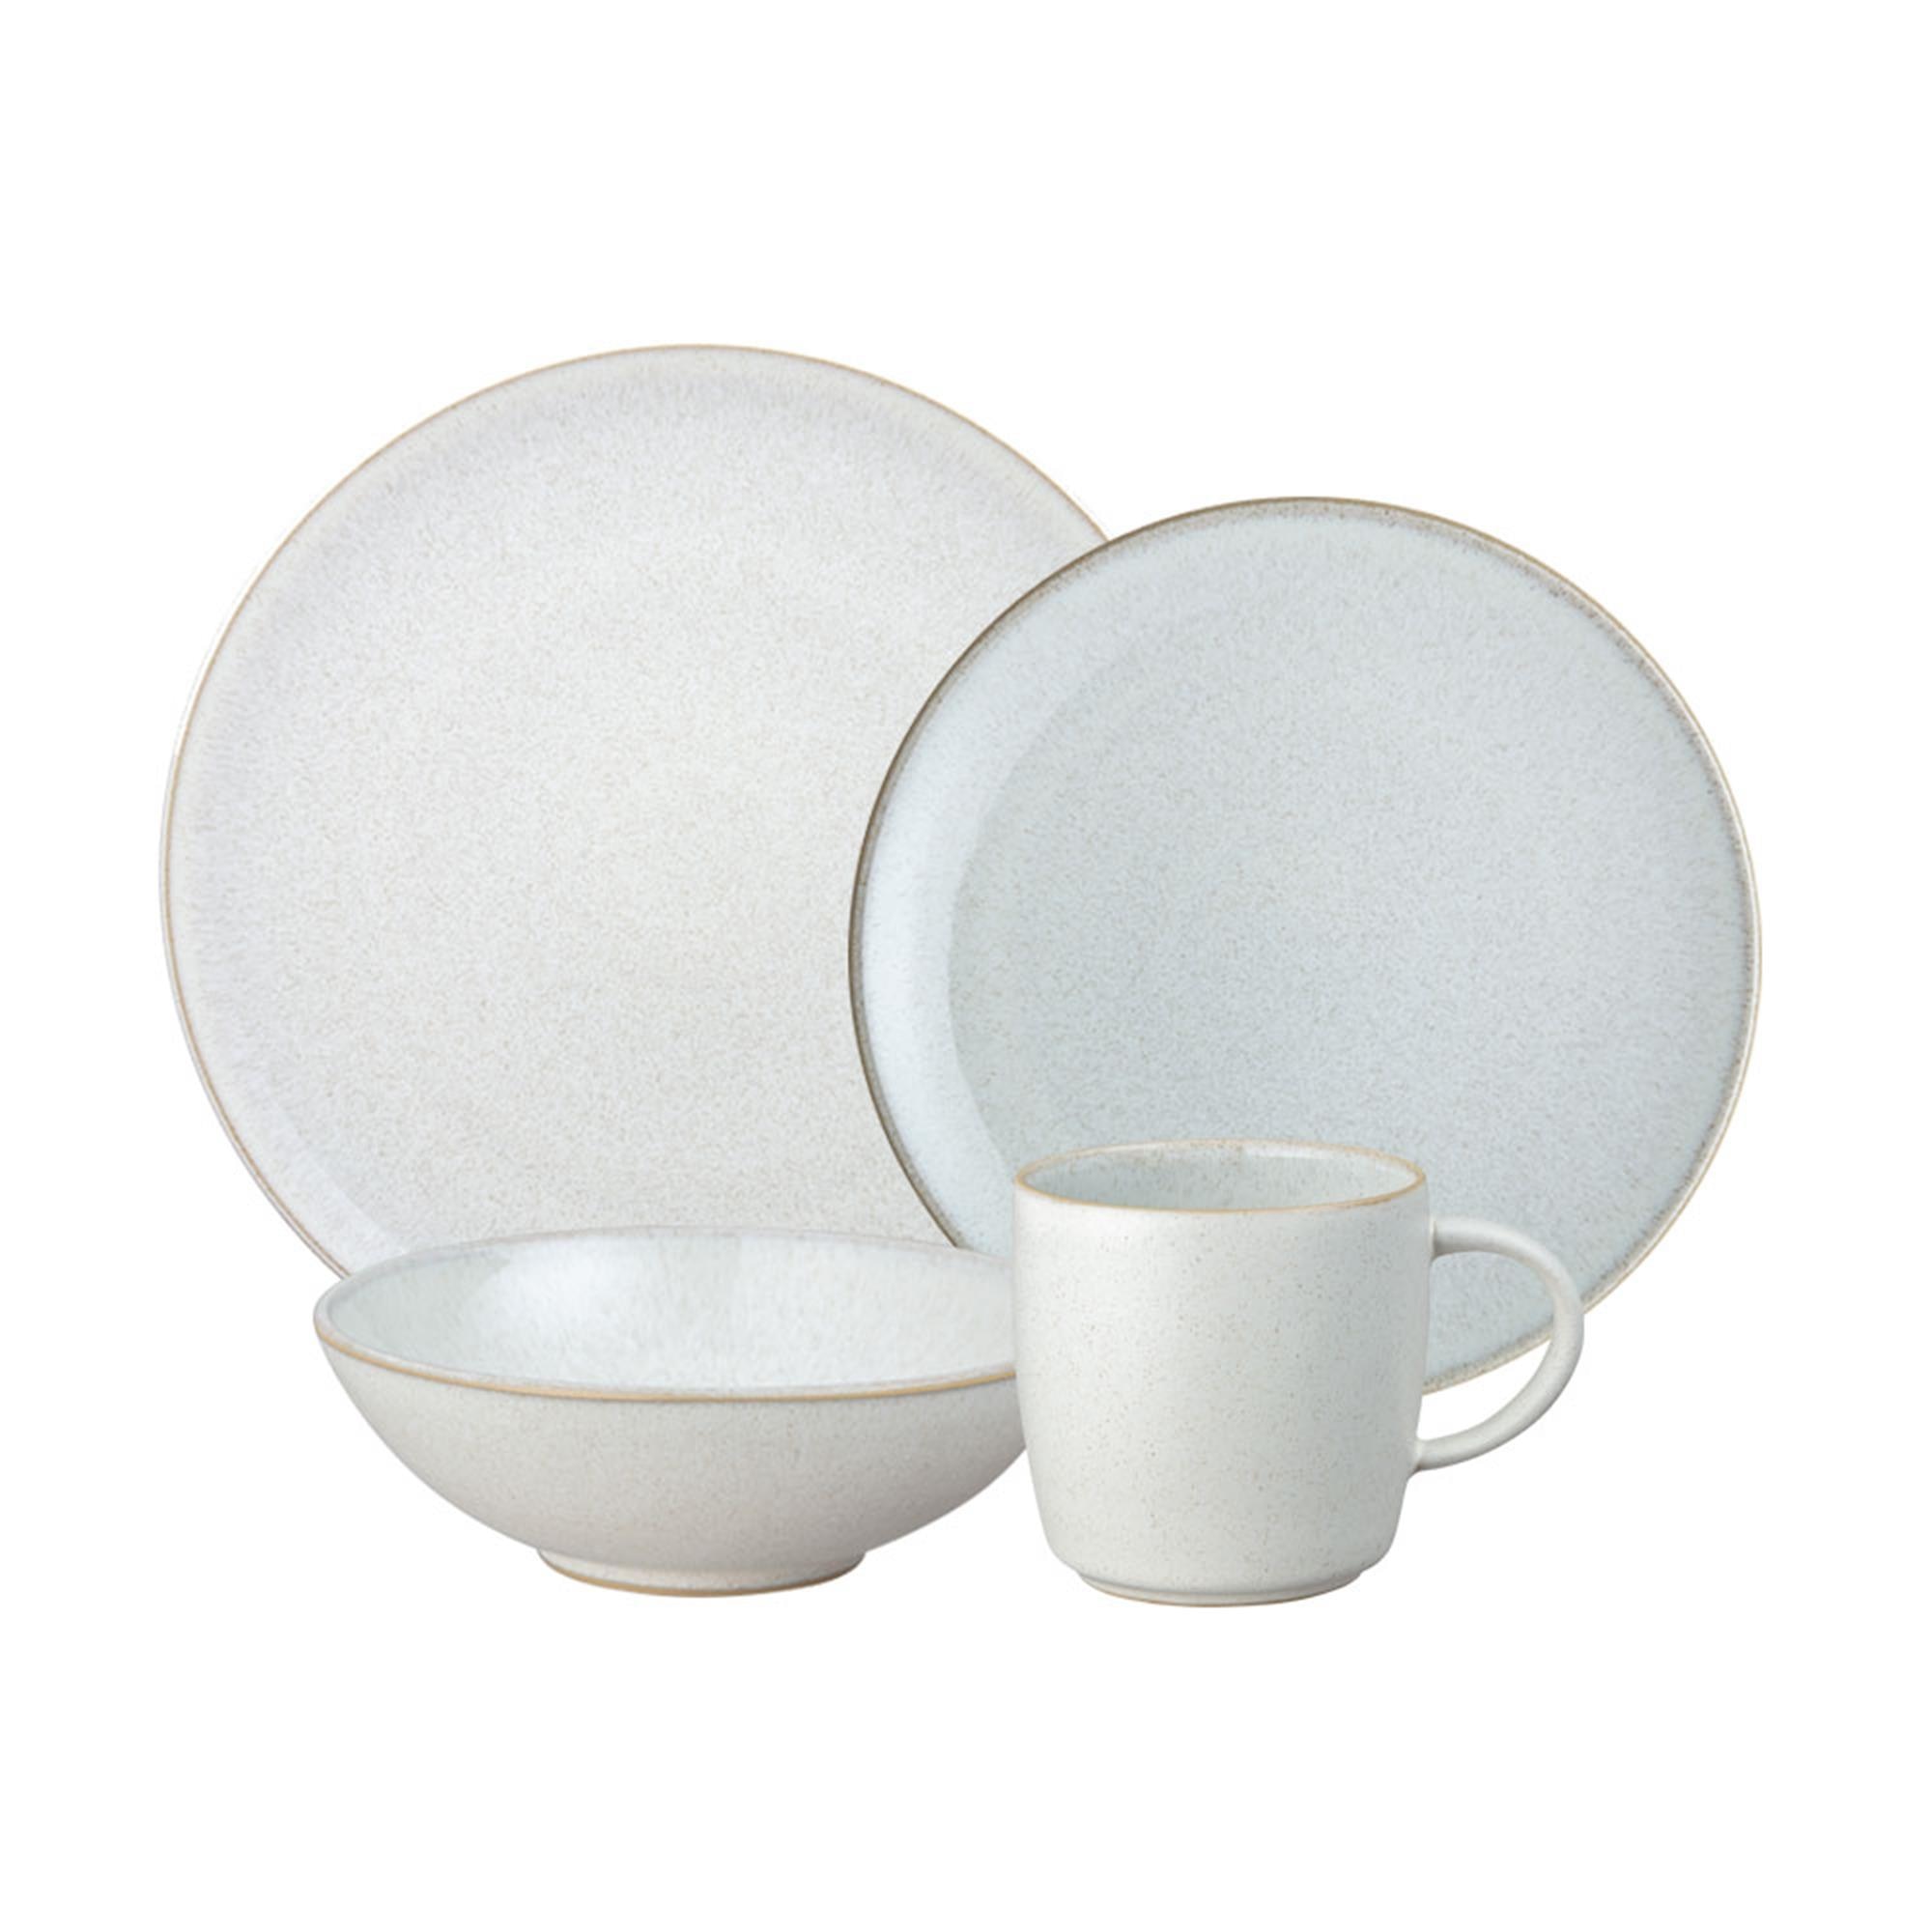 China by Denby 4-piece Place Setting Service for 1 